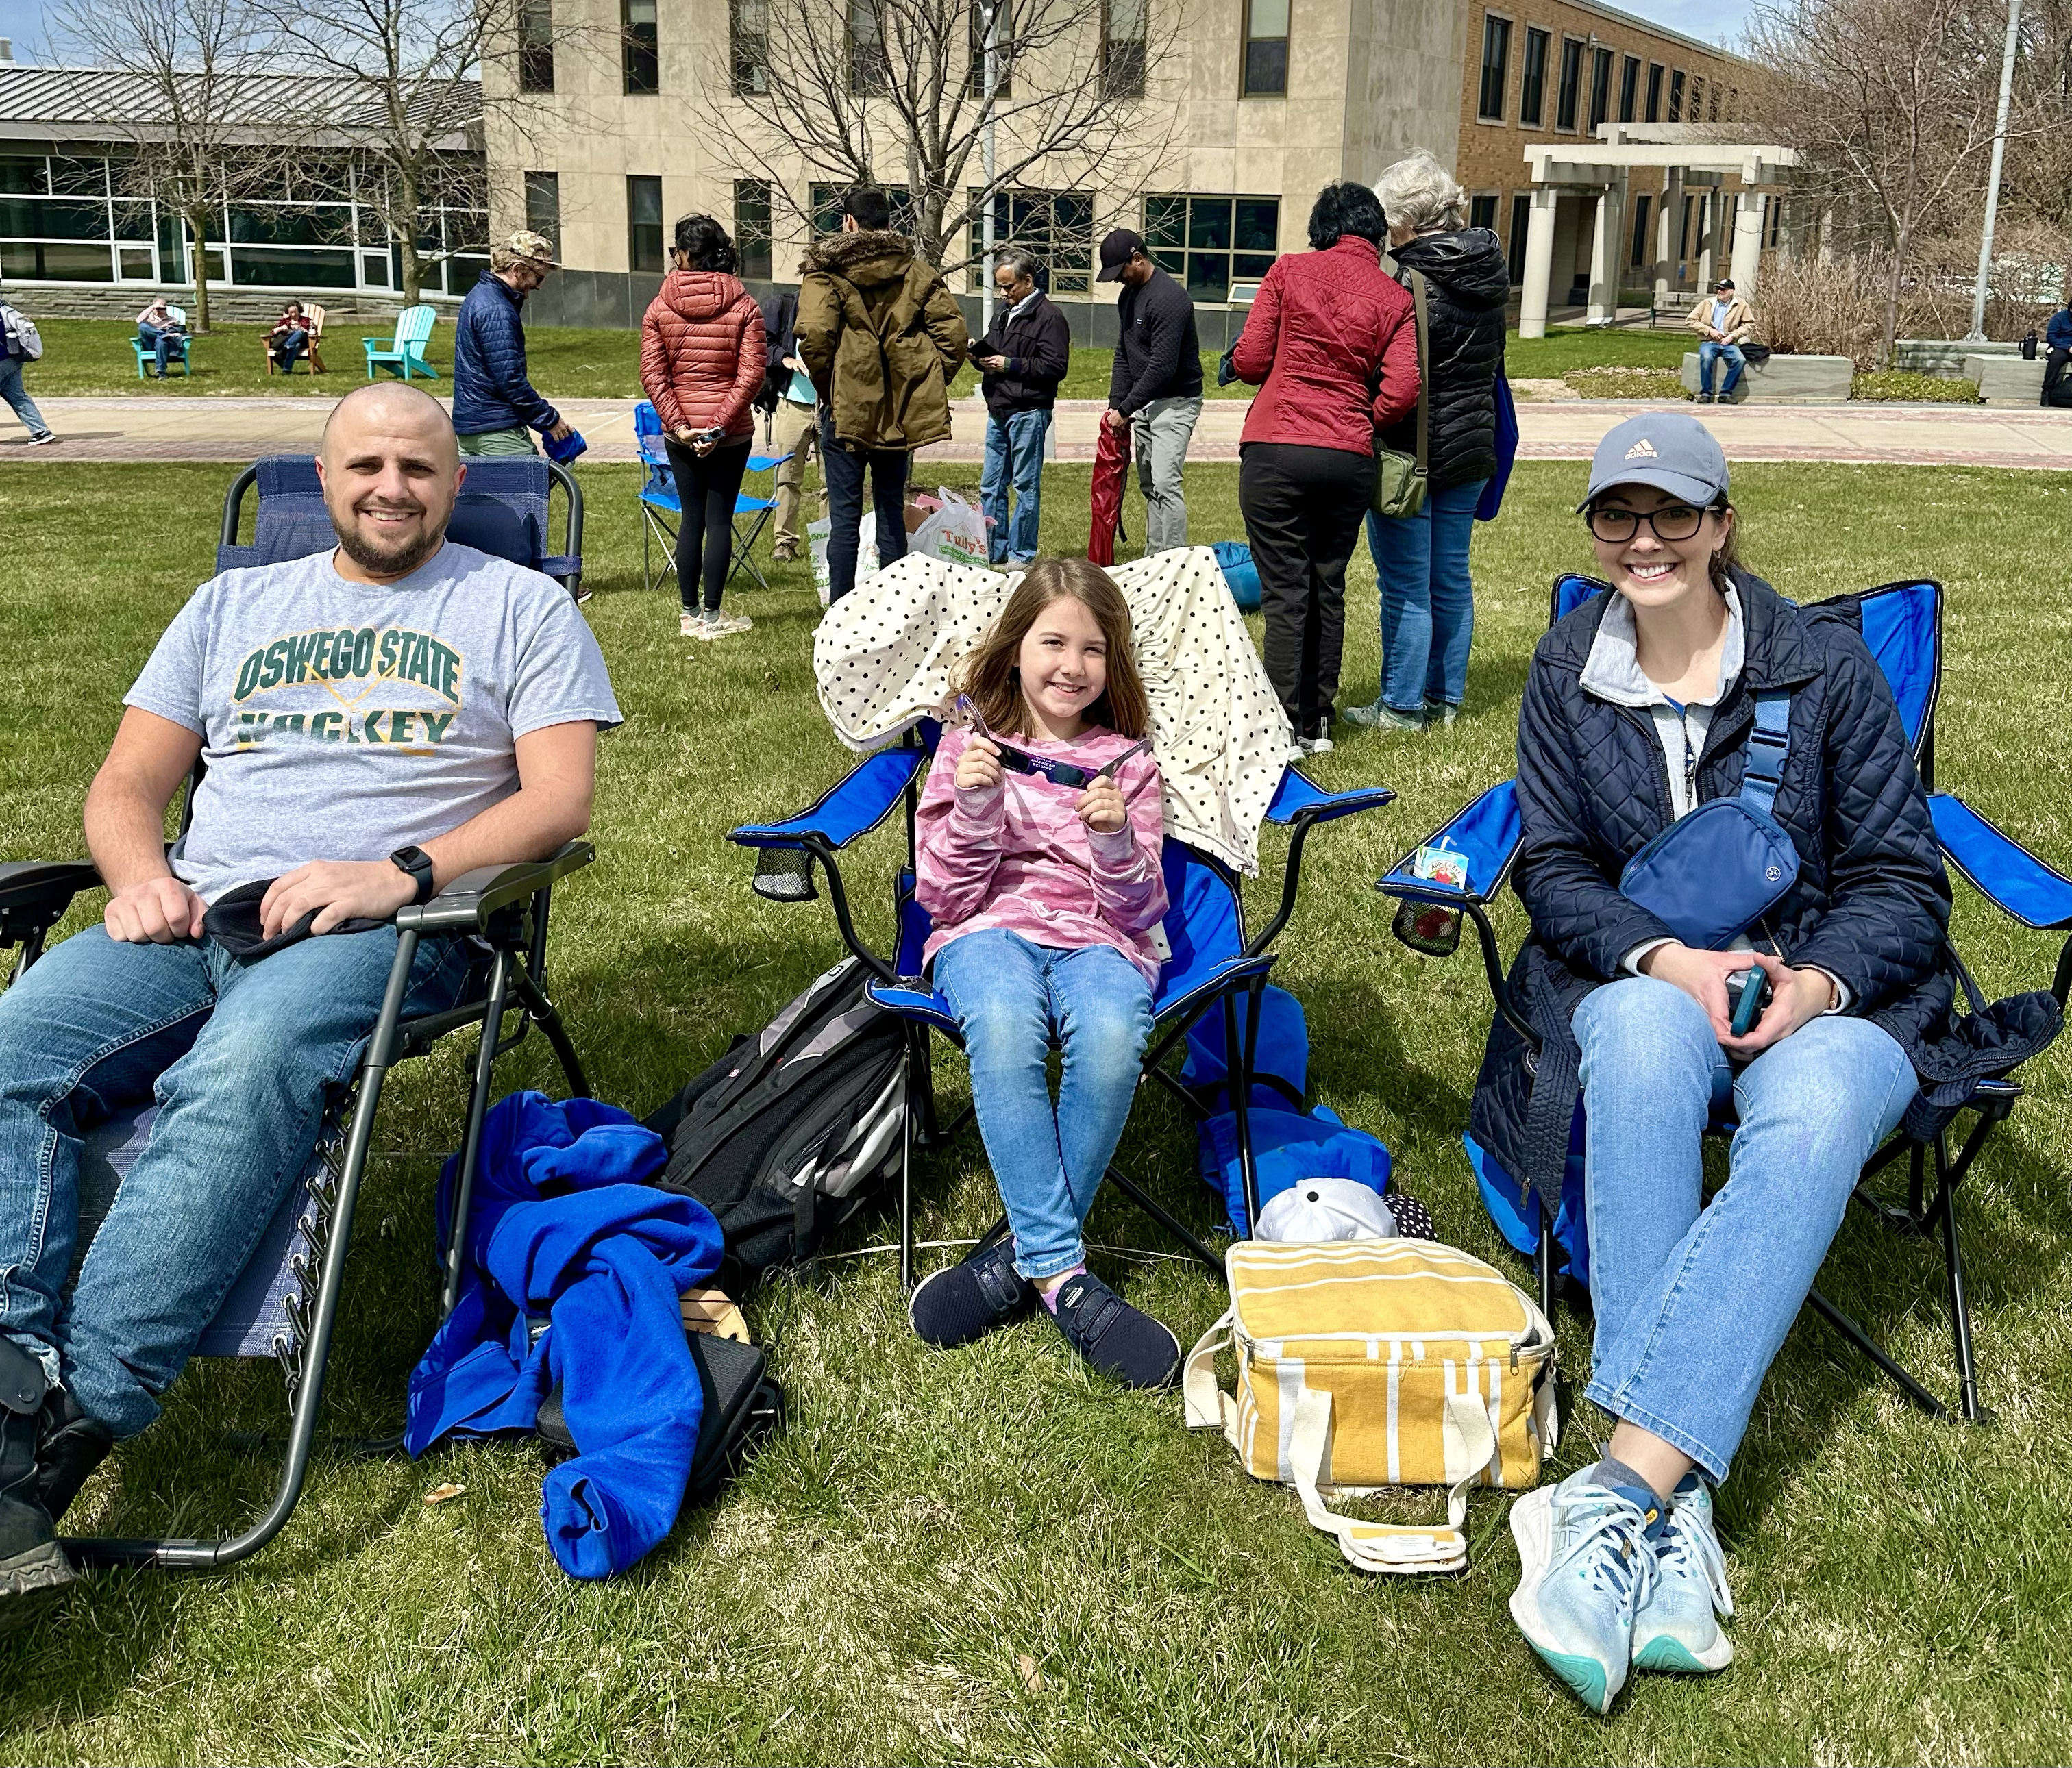 Eric Nemier, a 2012 SUNY Oswego alumnus, and his family returned to campus for the eclipse.